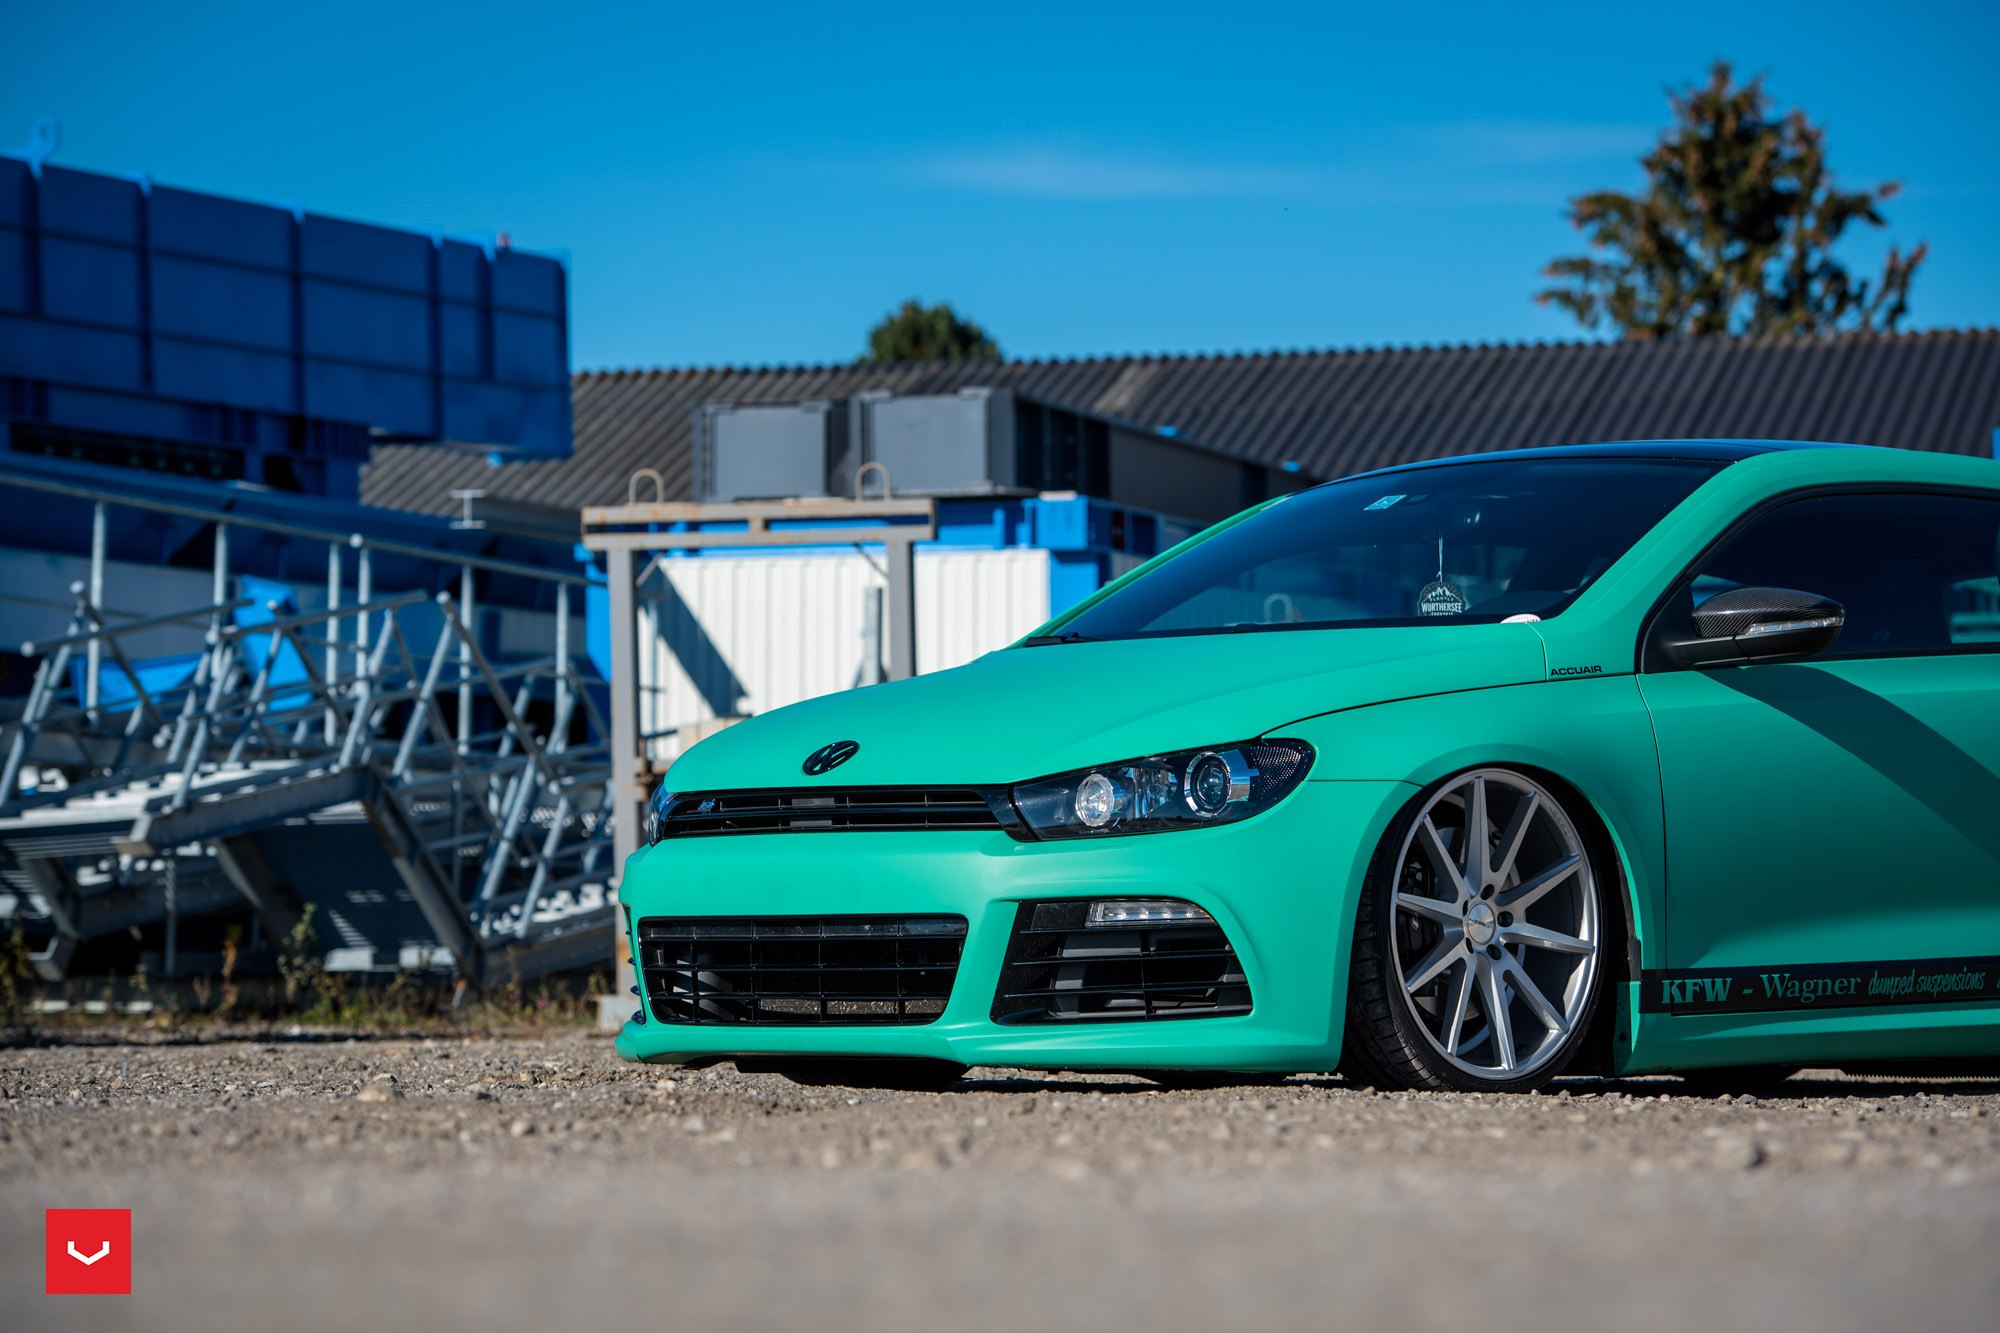 VW Scirocco on Air Suspension - Photo by Vossen